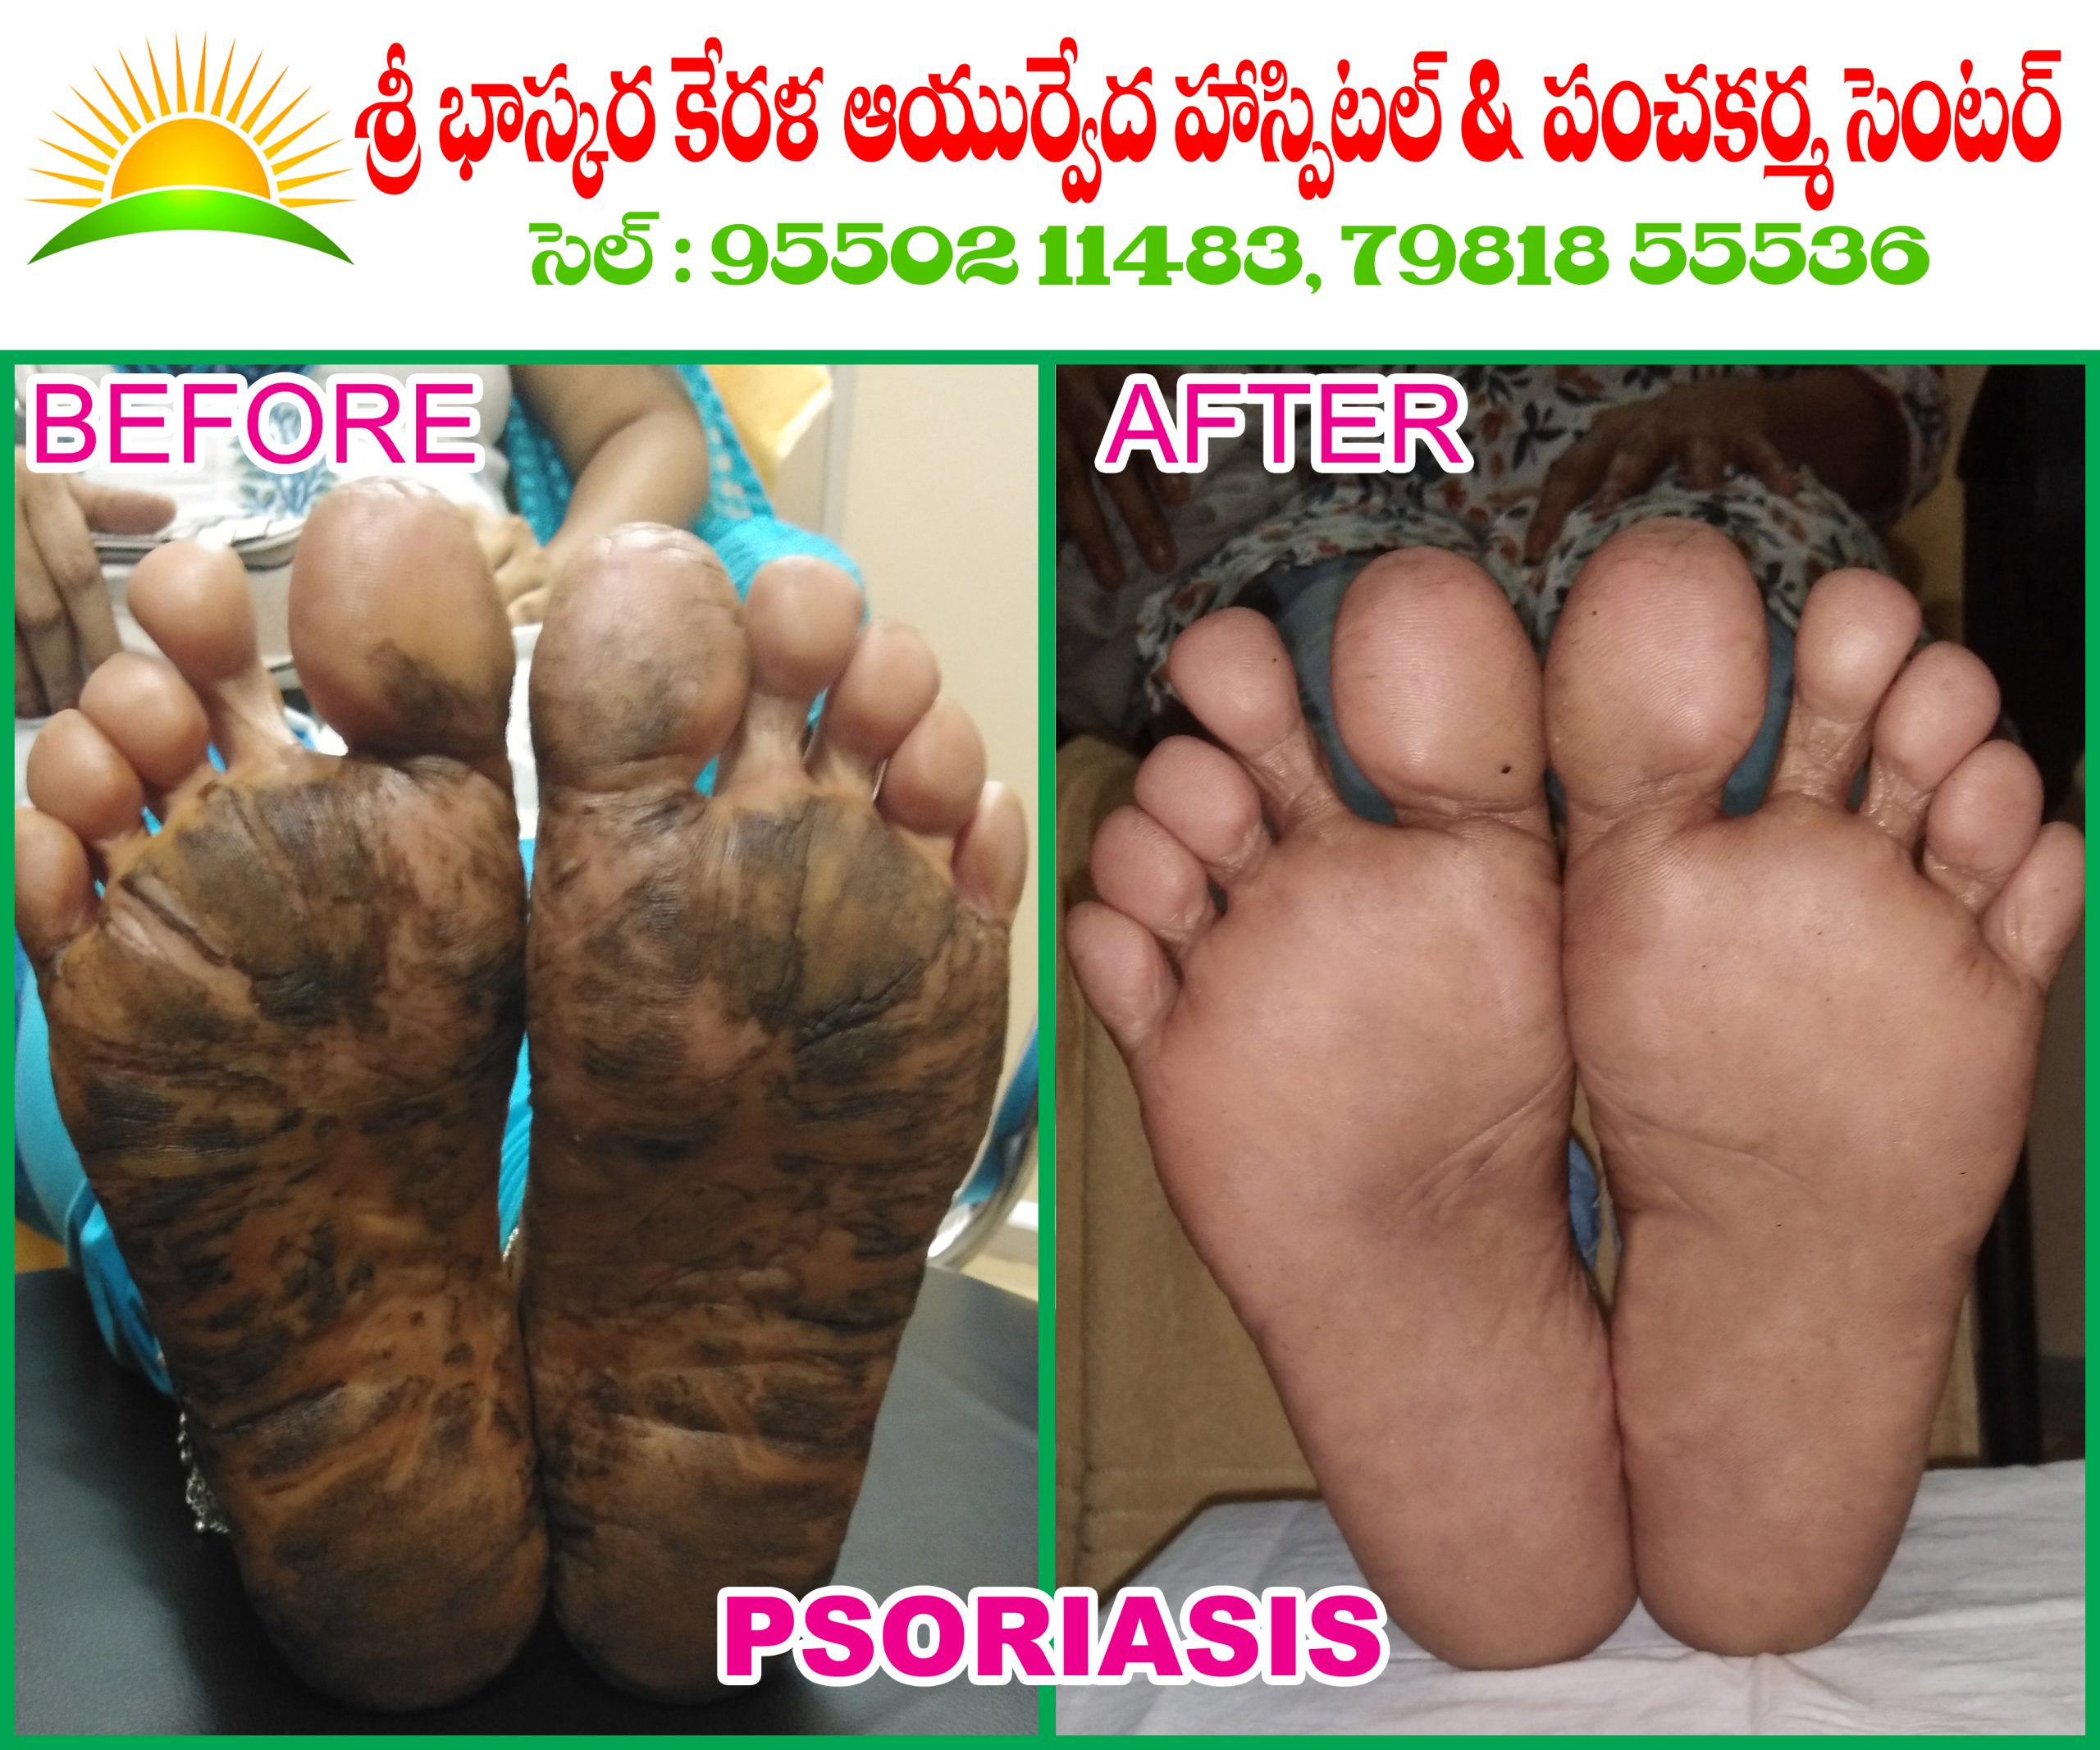 home remedy for cracked heels | Home health remedies, Health remedies,  Natural health remedies